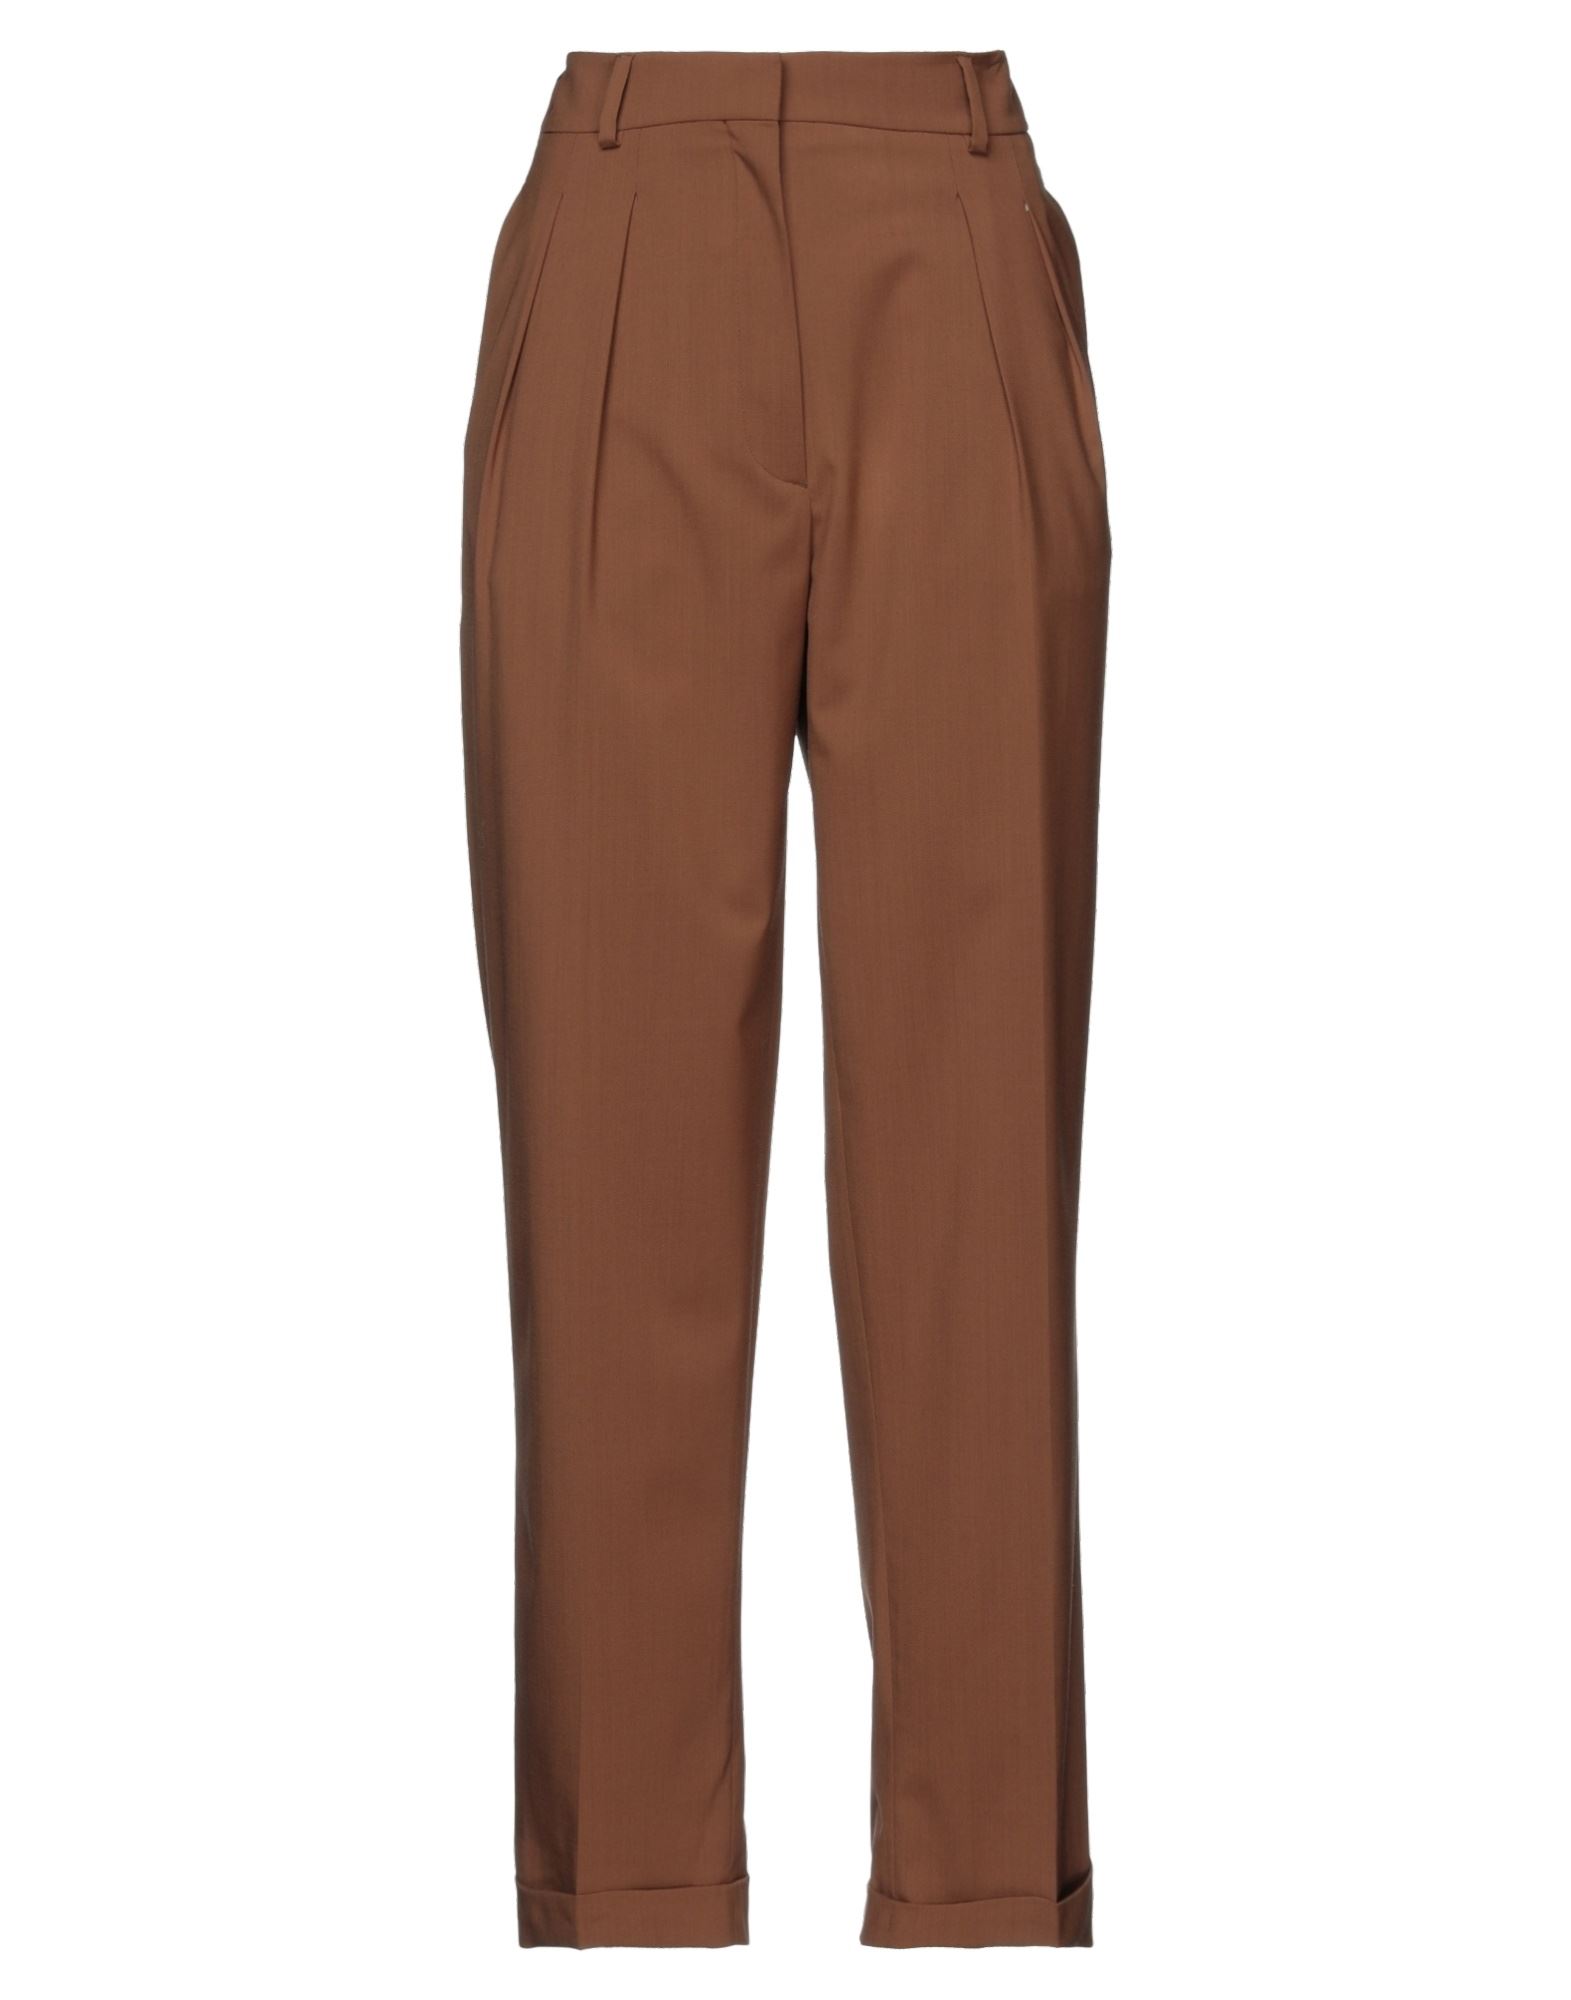 Mulberry Pants In Tan